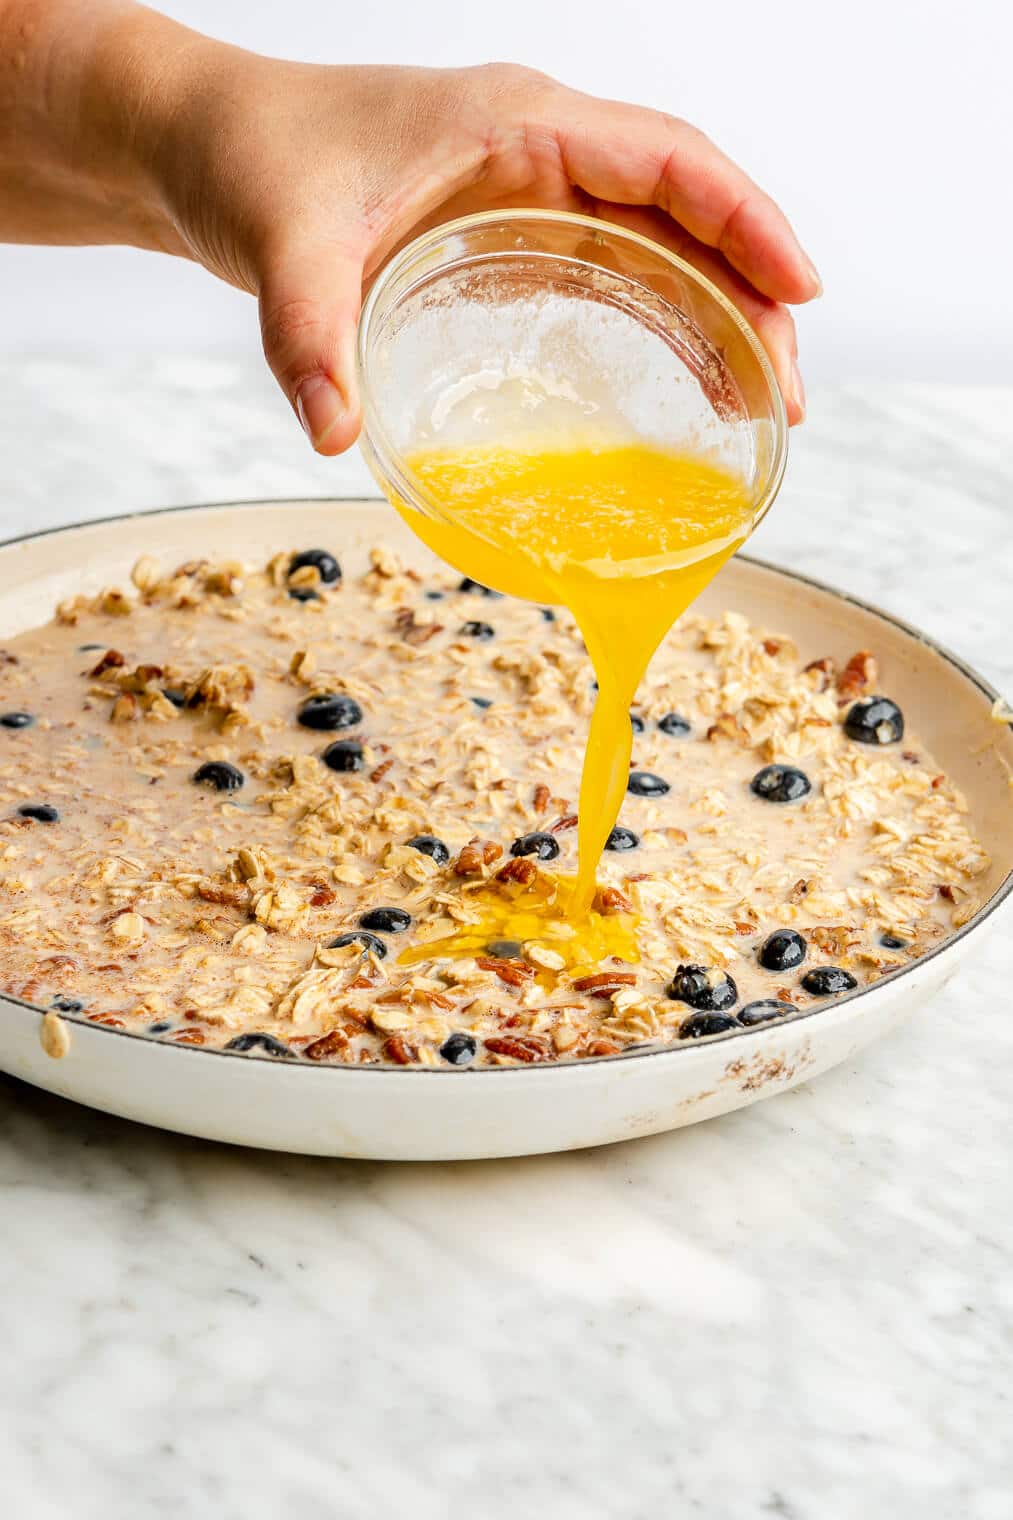 Hand drizzling melted butter on top of blueberry oatmeal ingredients in a white skillet.